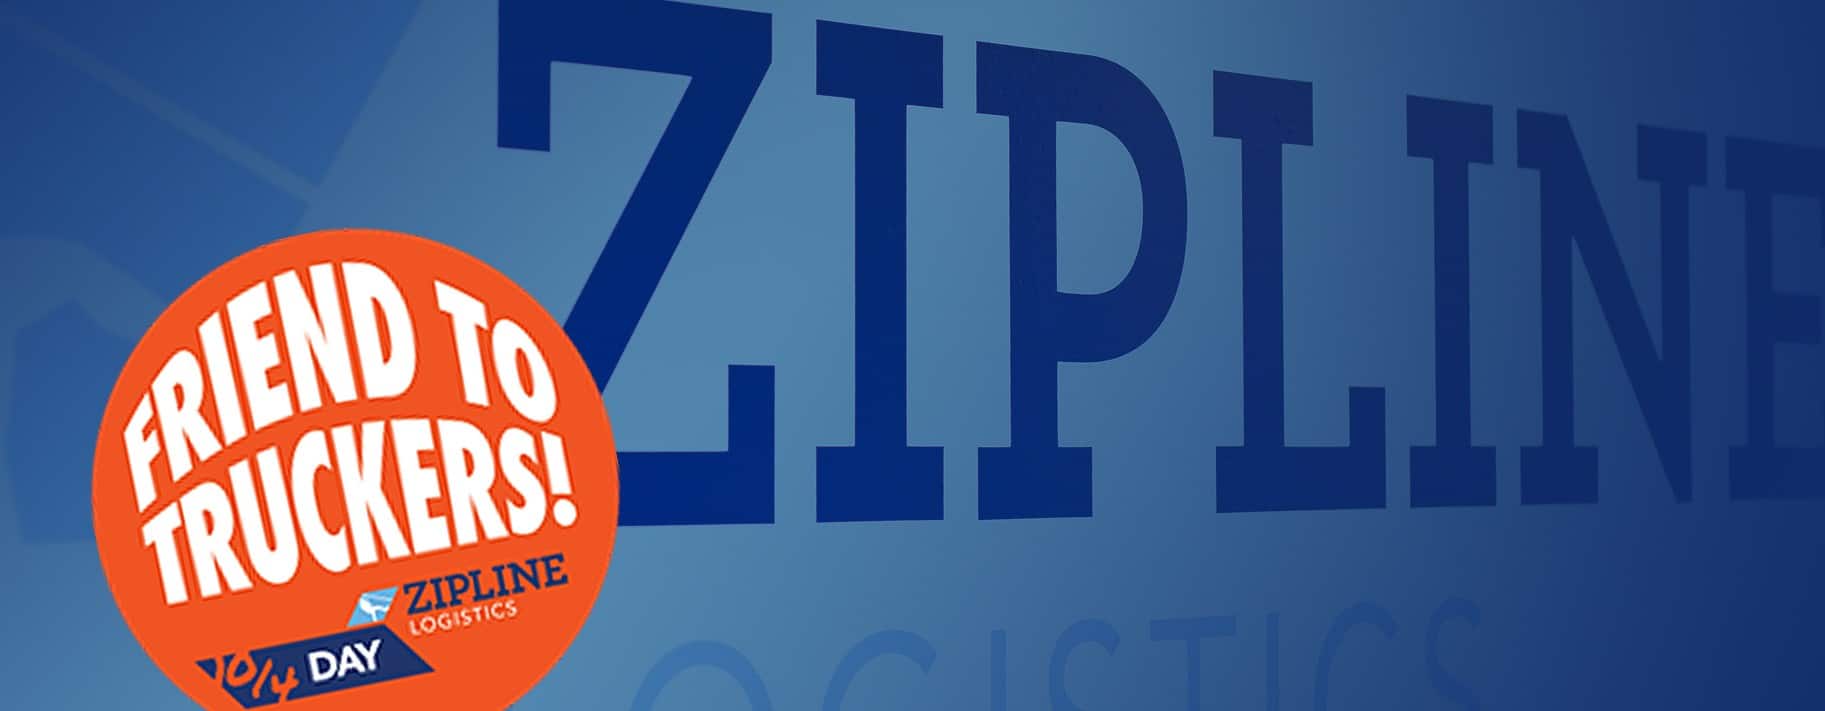 CPG Brands: Dominate Your Category With a Logistics Strategy - Zipline  Logistics